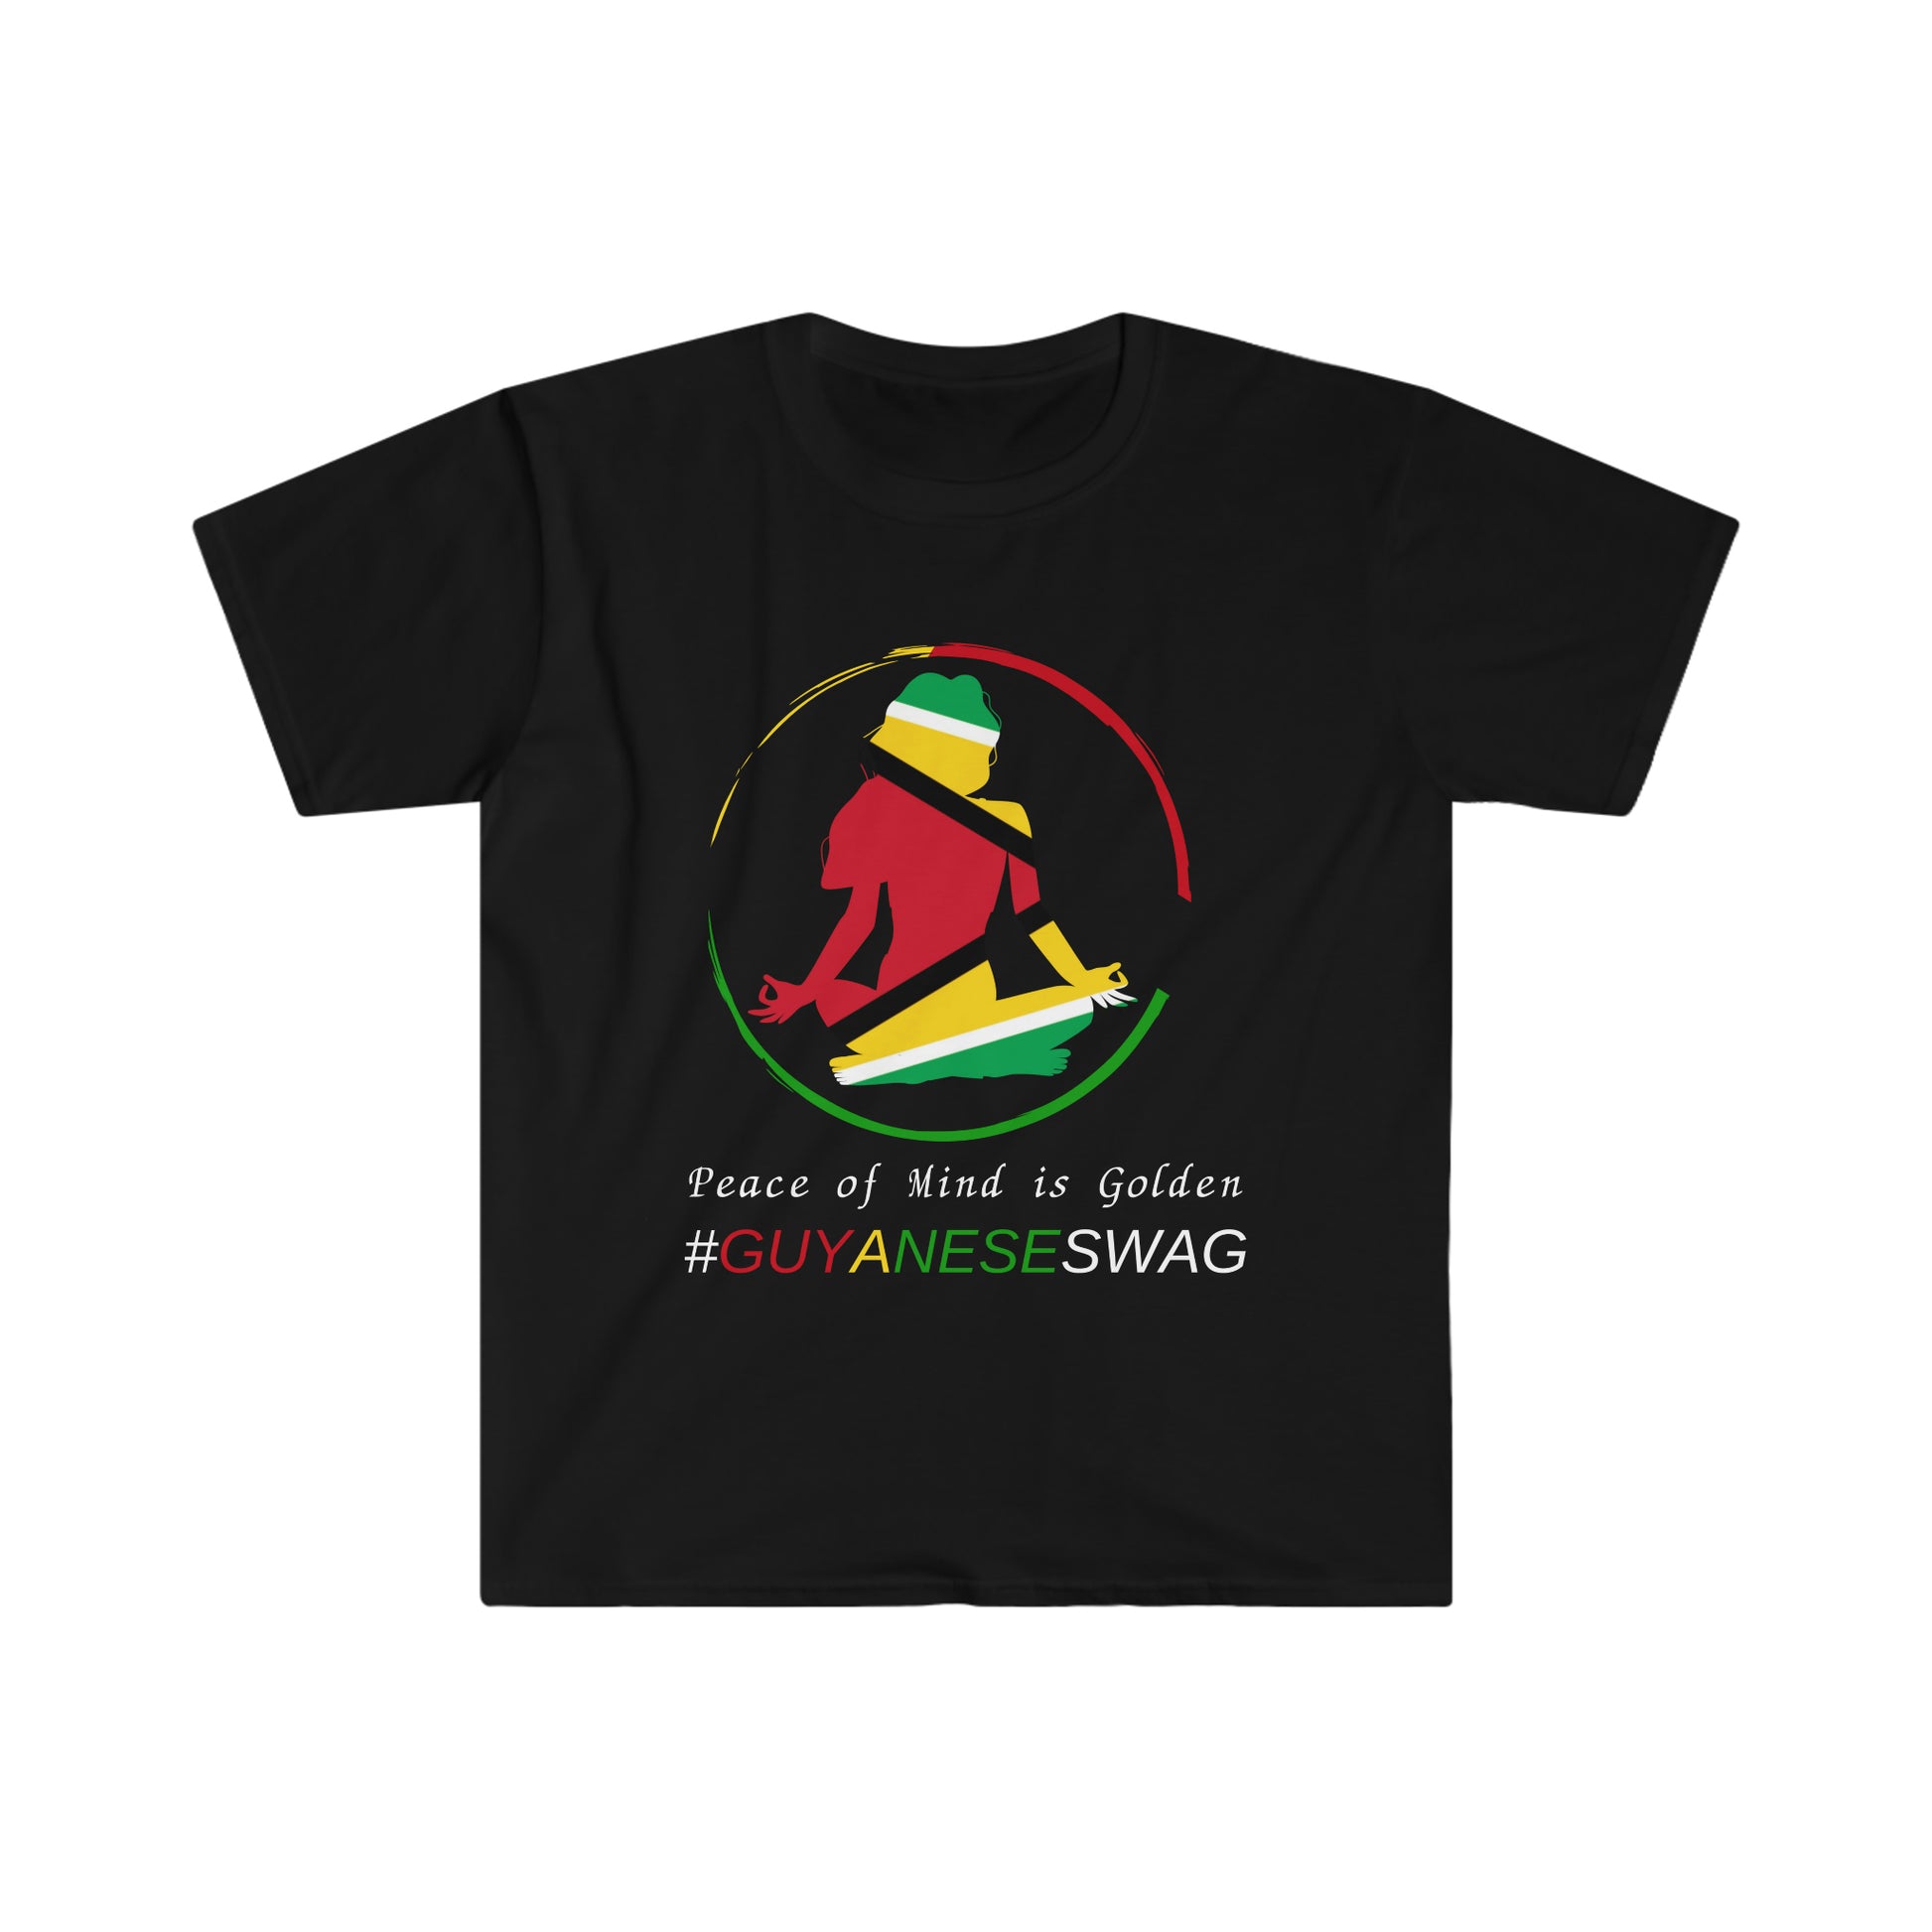 Peace of Mind is Golden Unisex Softstyle T-Shirt by Guyanese Swag